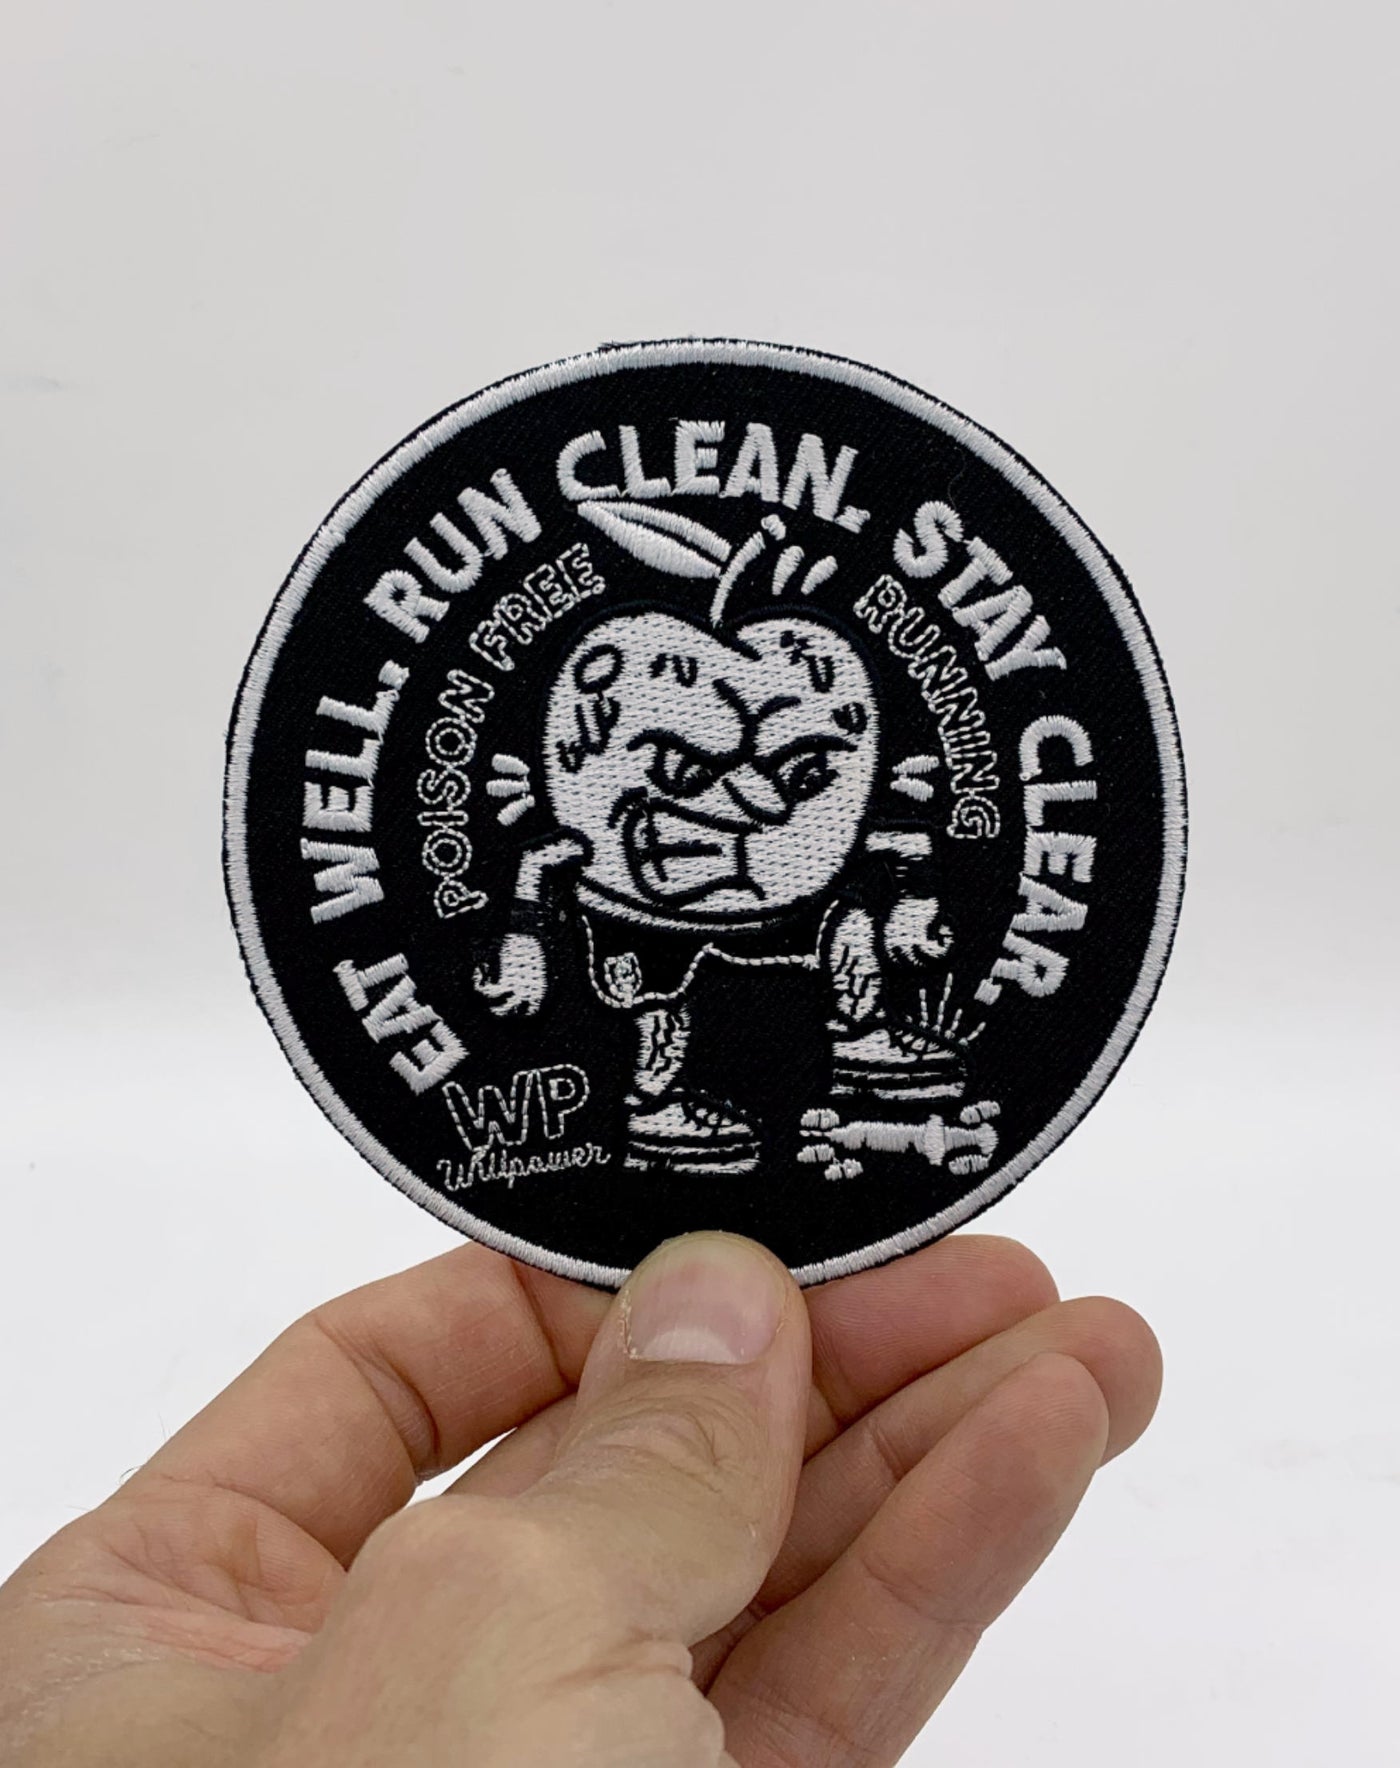 "Eat Well - Run Clean - Stay Clear" Patch